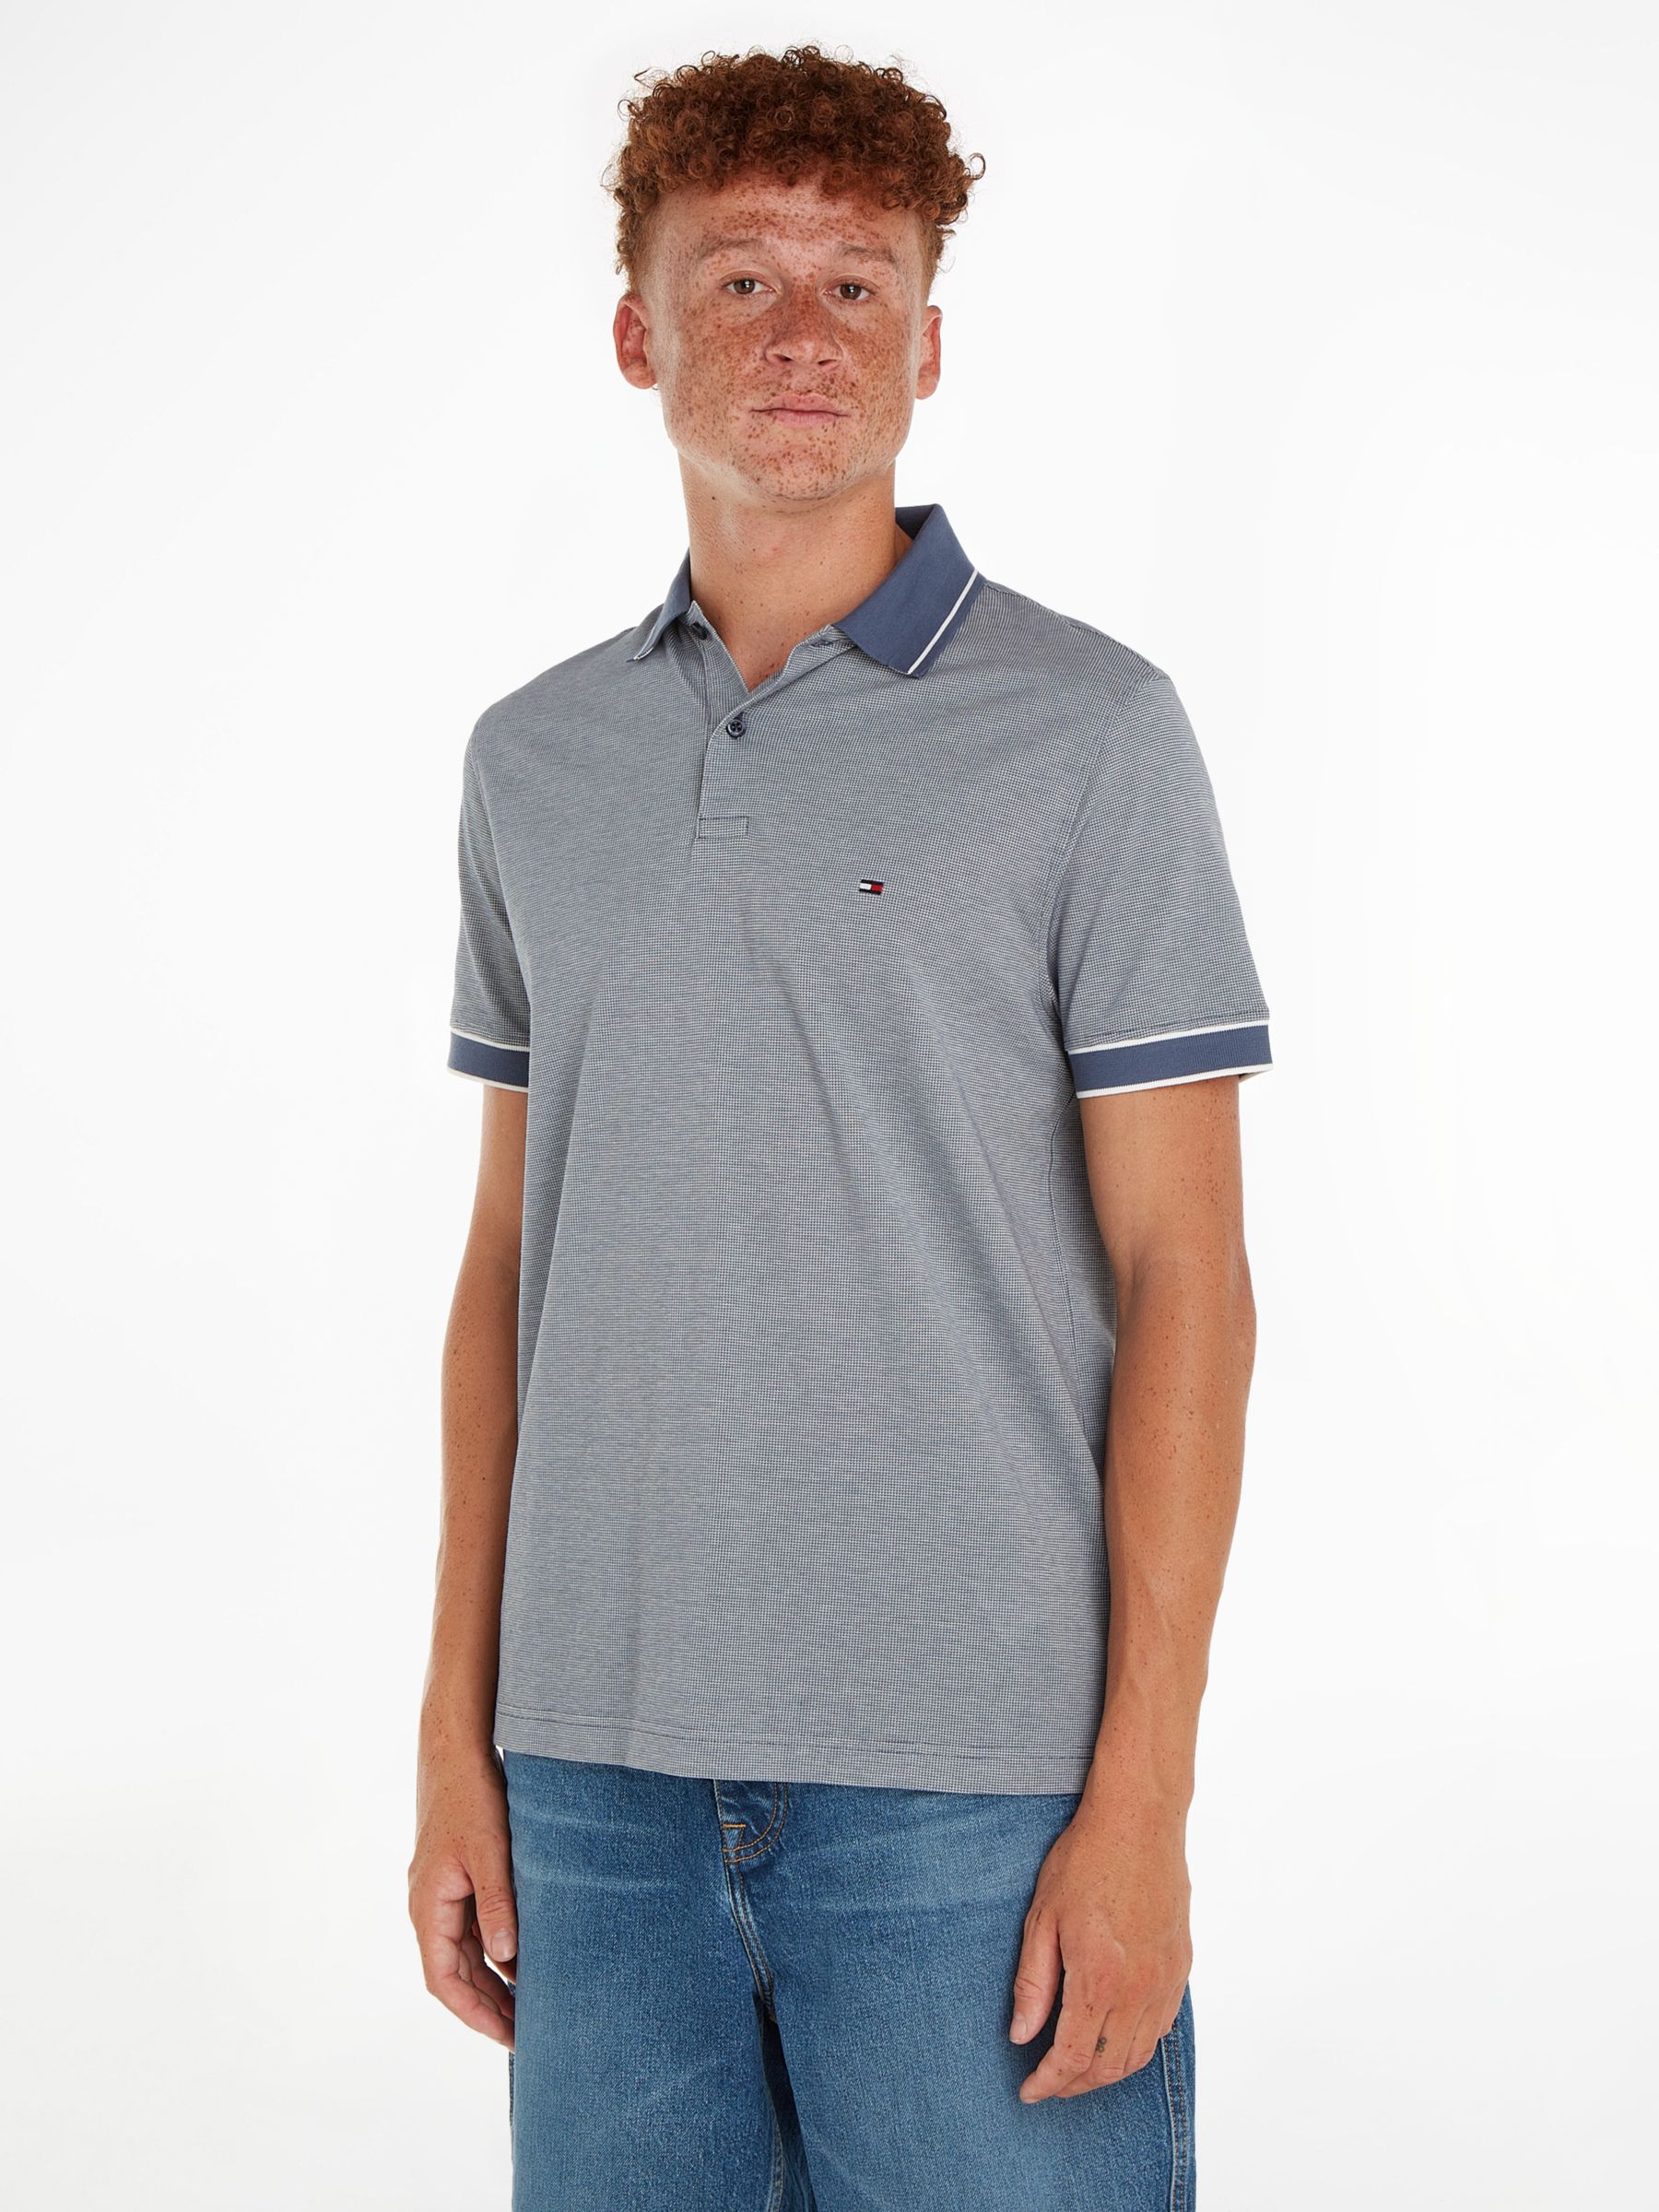 Tommy Hilfiger Monotype Oxford Polo Top, Blue, L